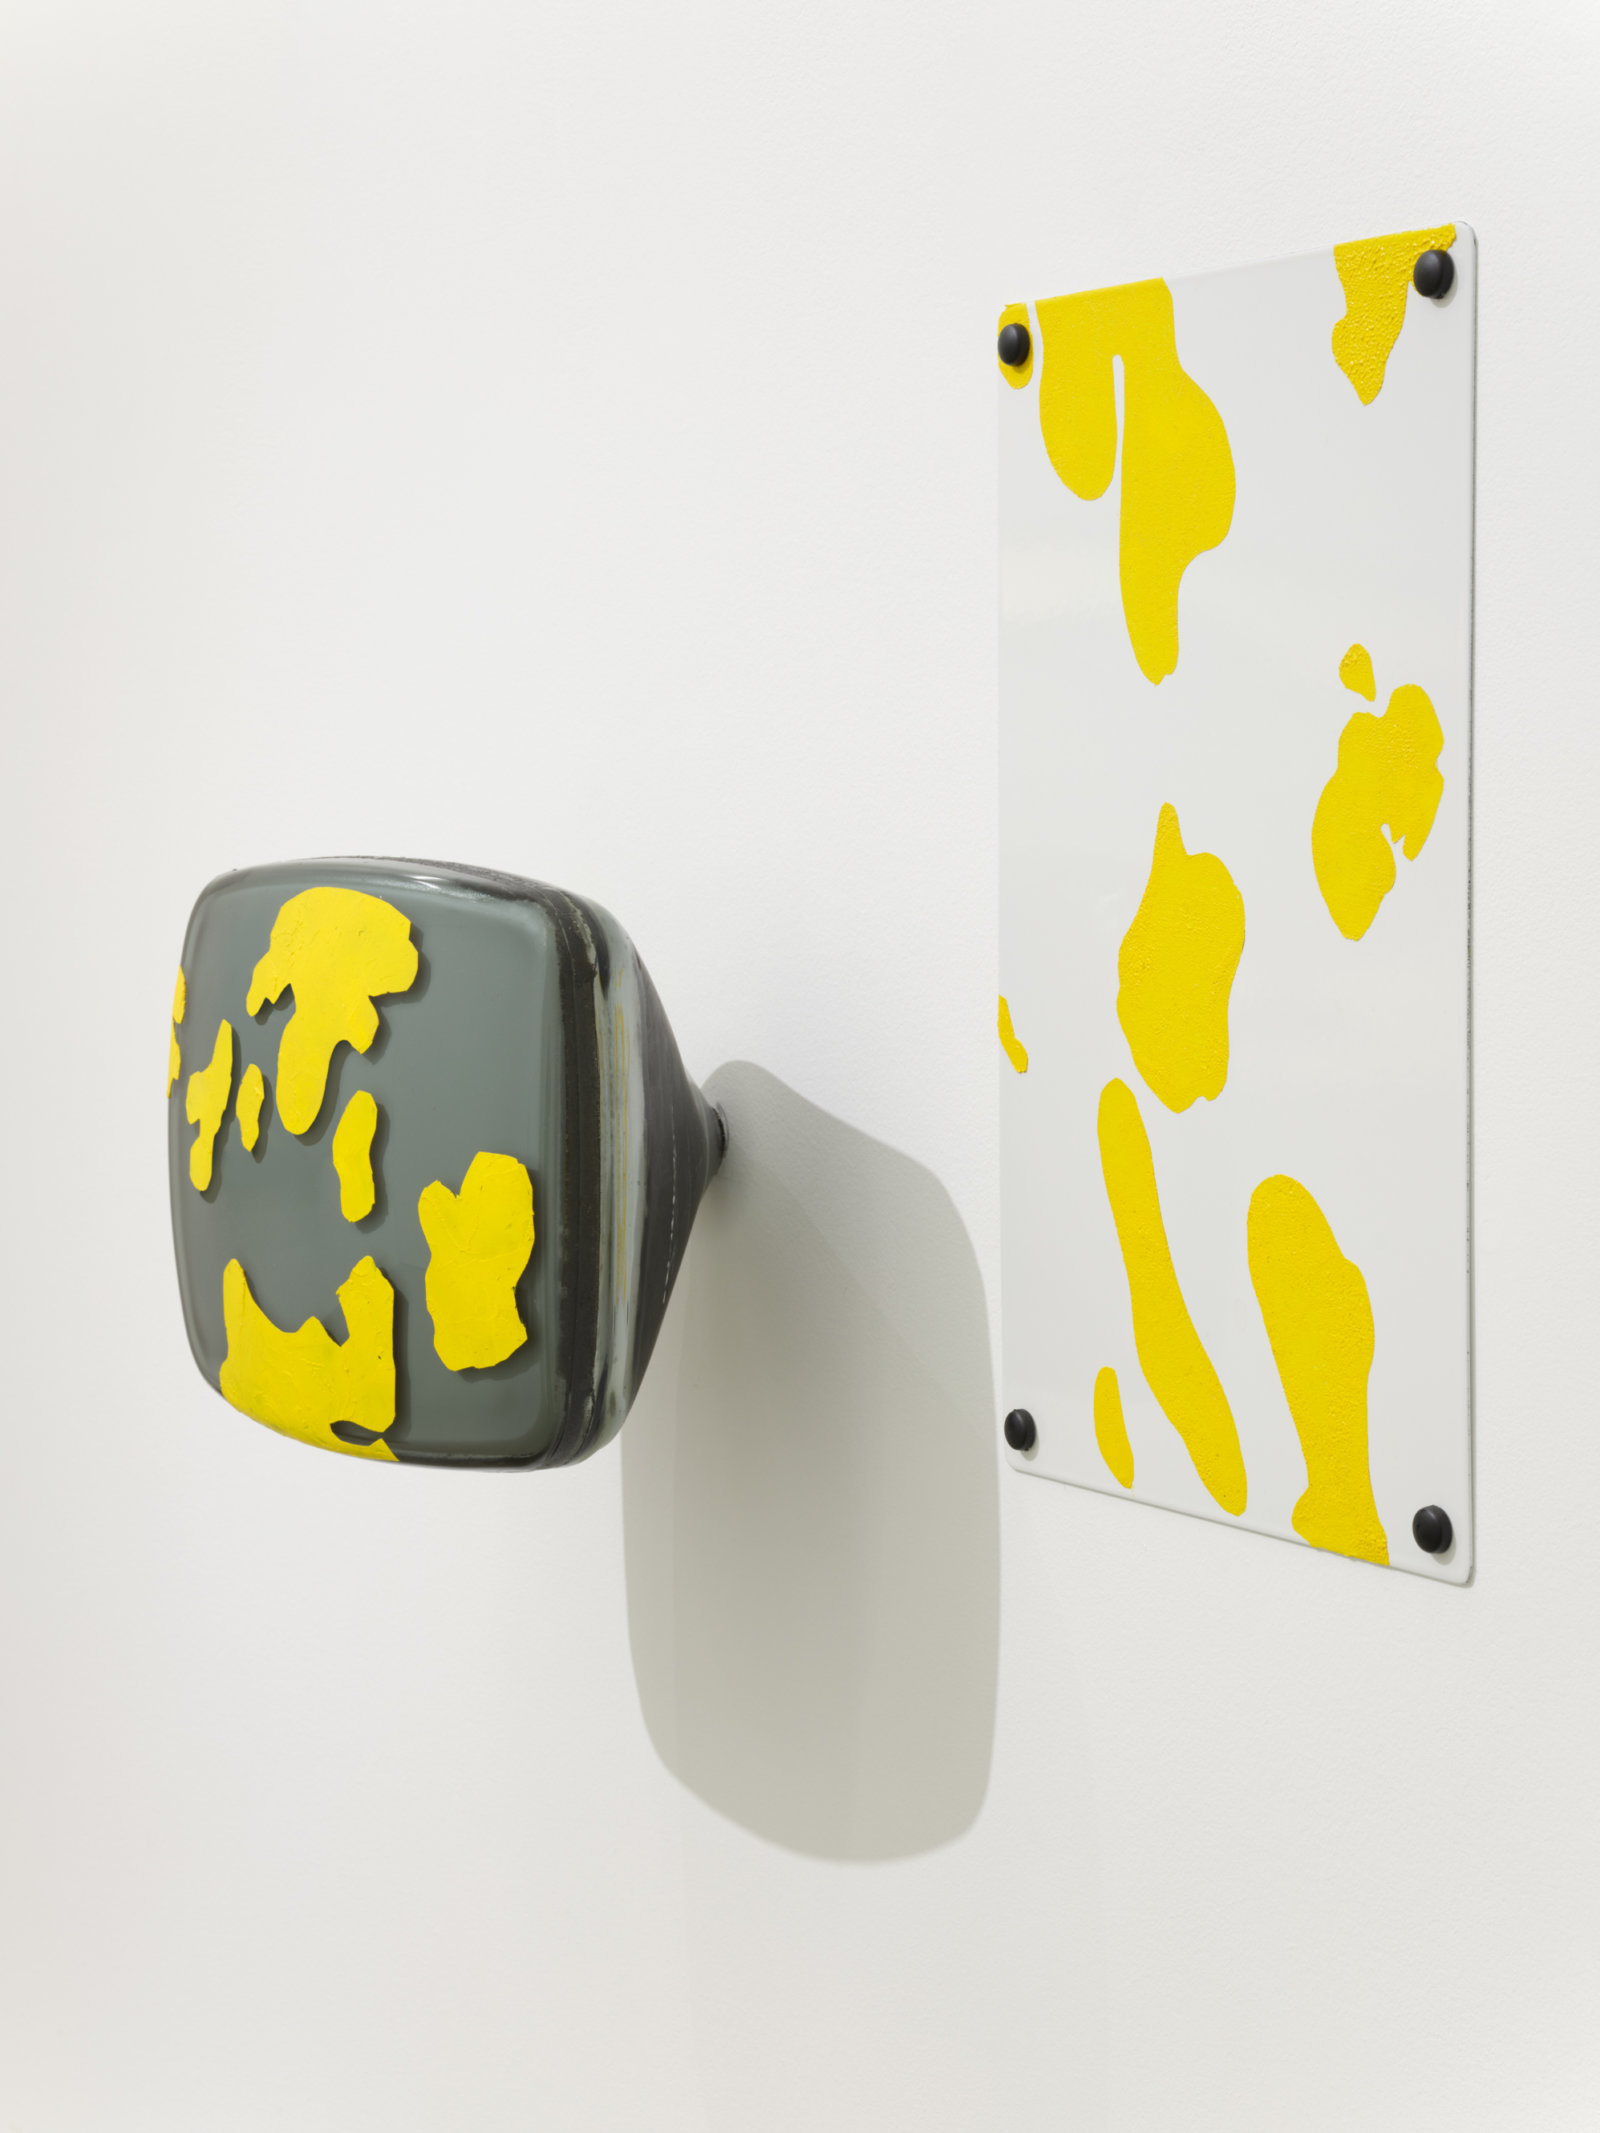 Jerry Pethick, Through the Trees (Walnut), 1994–1995, enamelled steel, silicone, TV tube, aluminum, steel nails, 18 x 27 x 28 in. (46 x 69 x 71 cm)